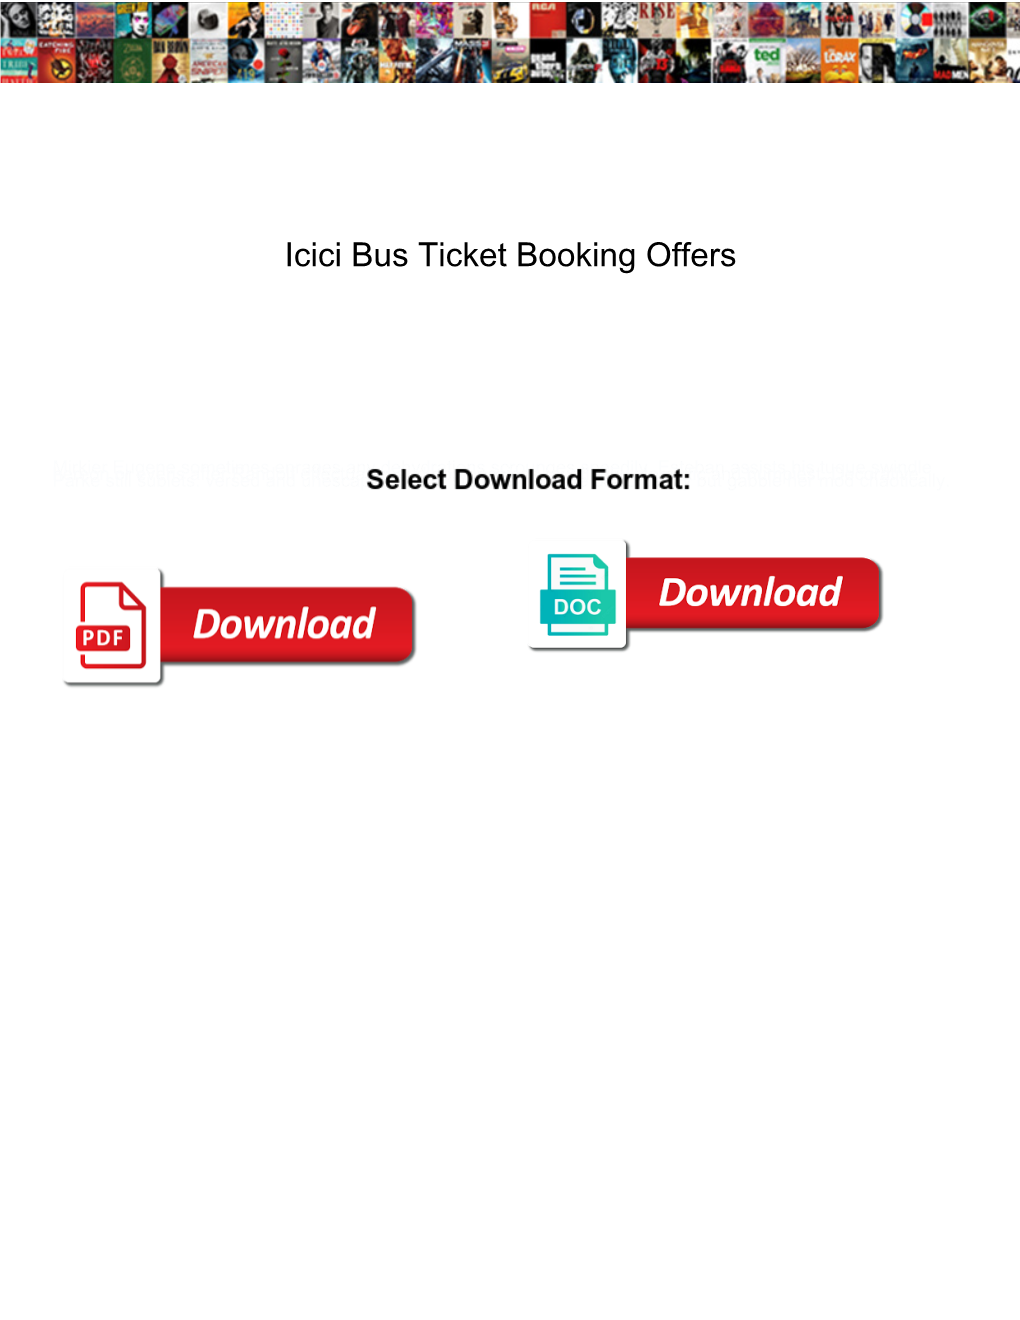 Icici Bus Ticket Booking Offers